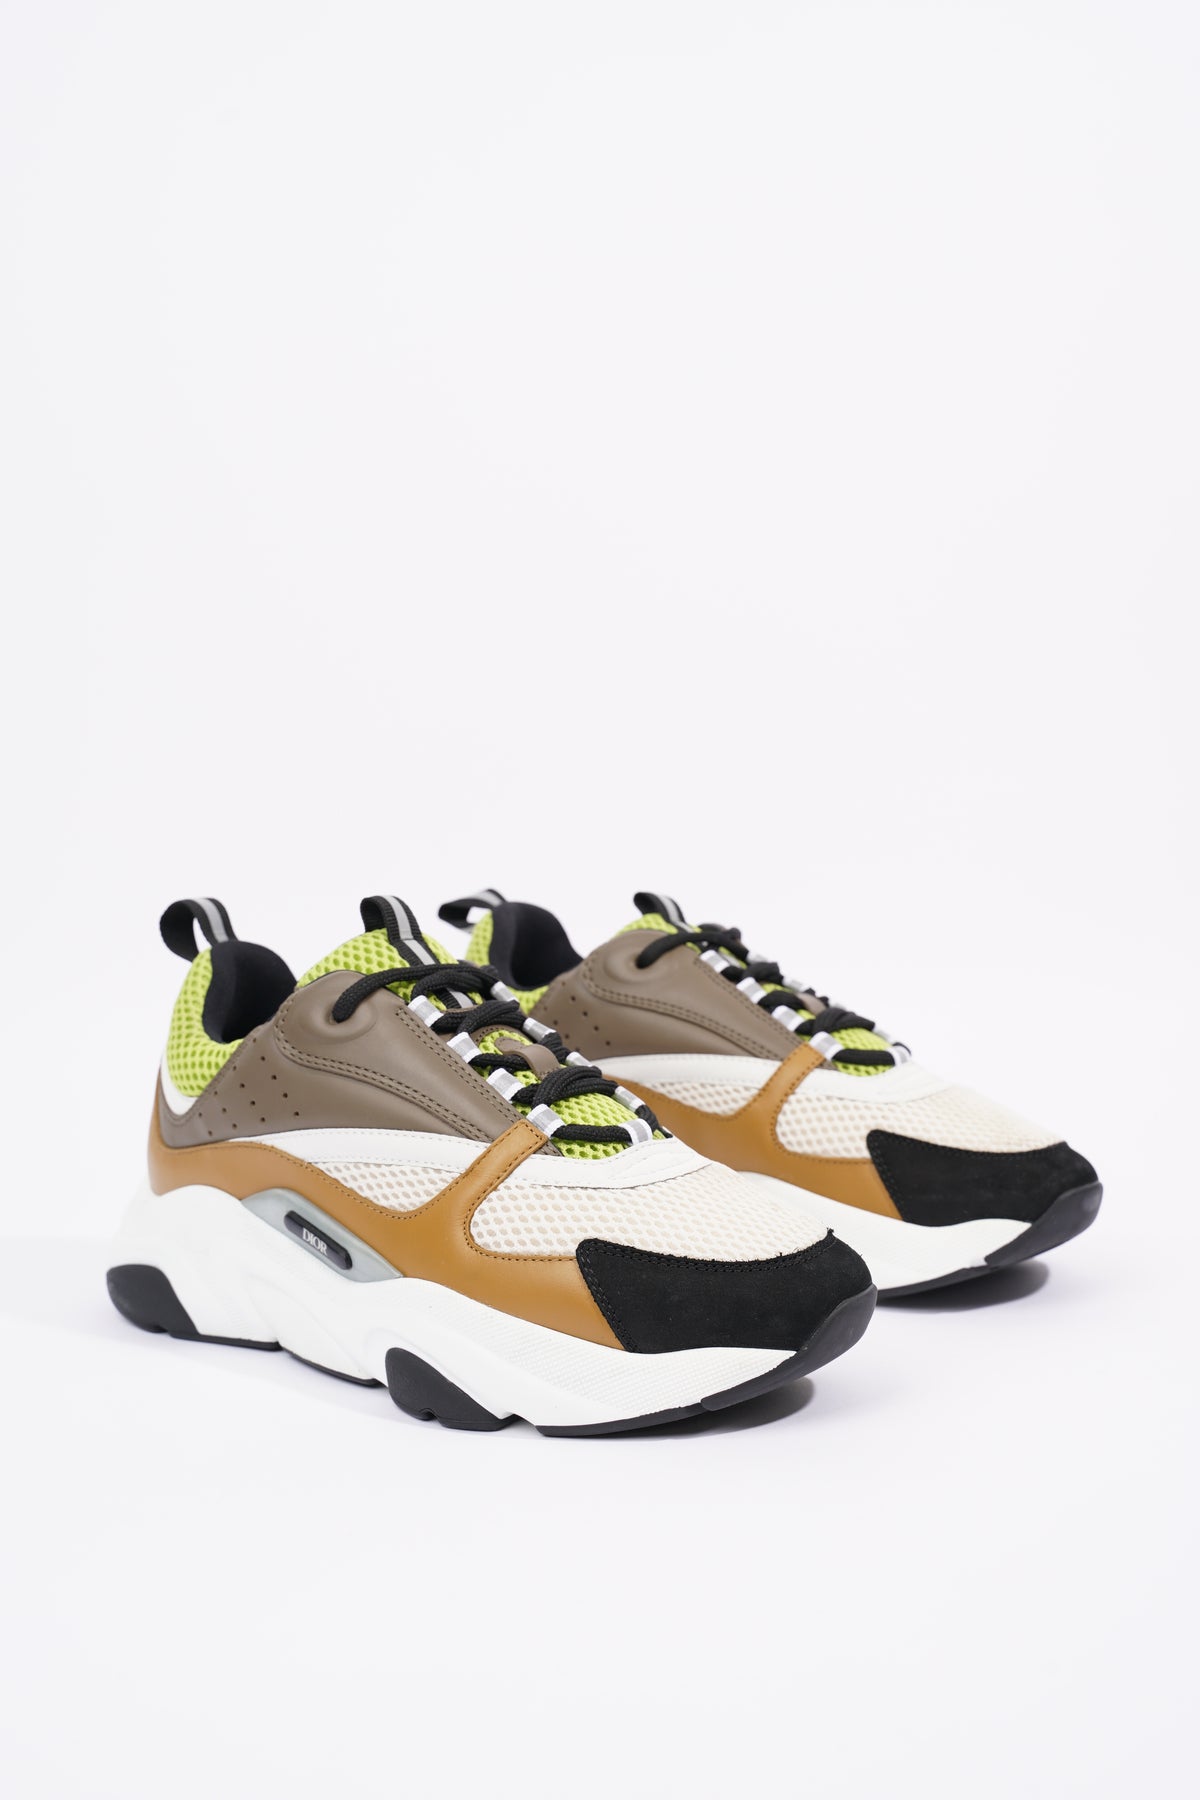 Dior Ivory, Lime Green, & Brown 'B22' Sneakers